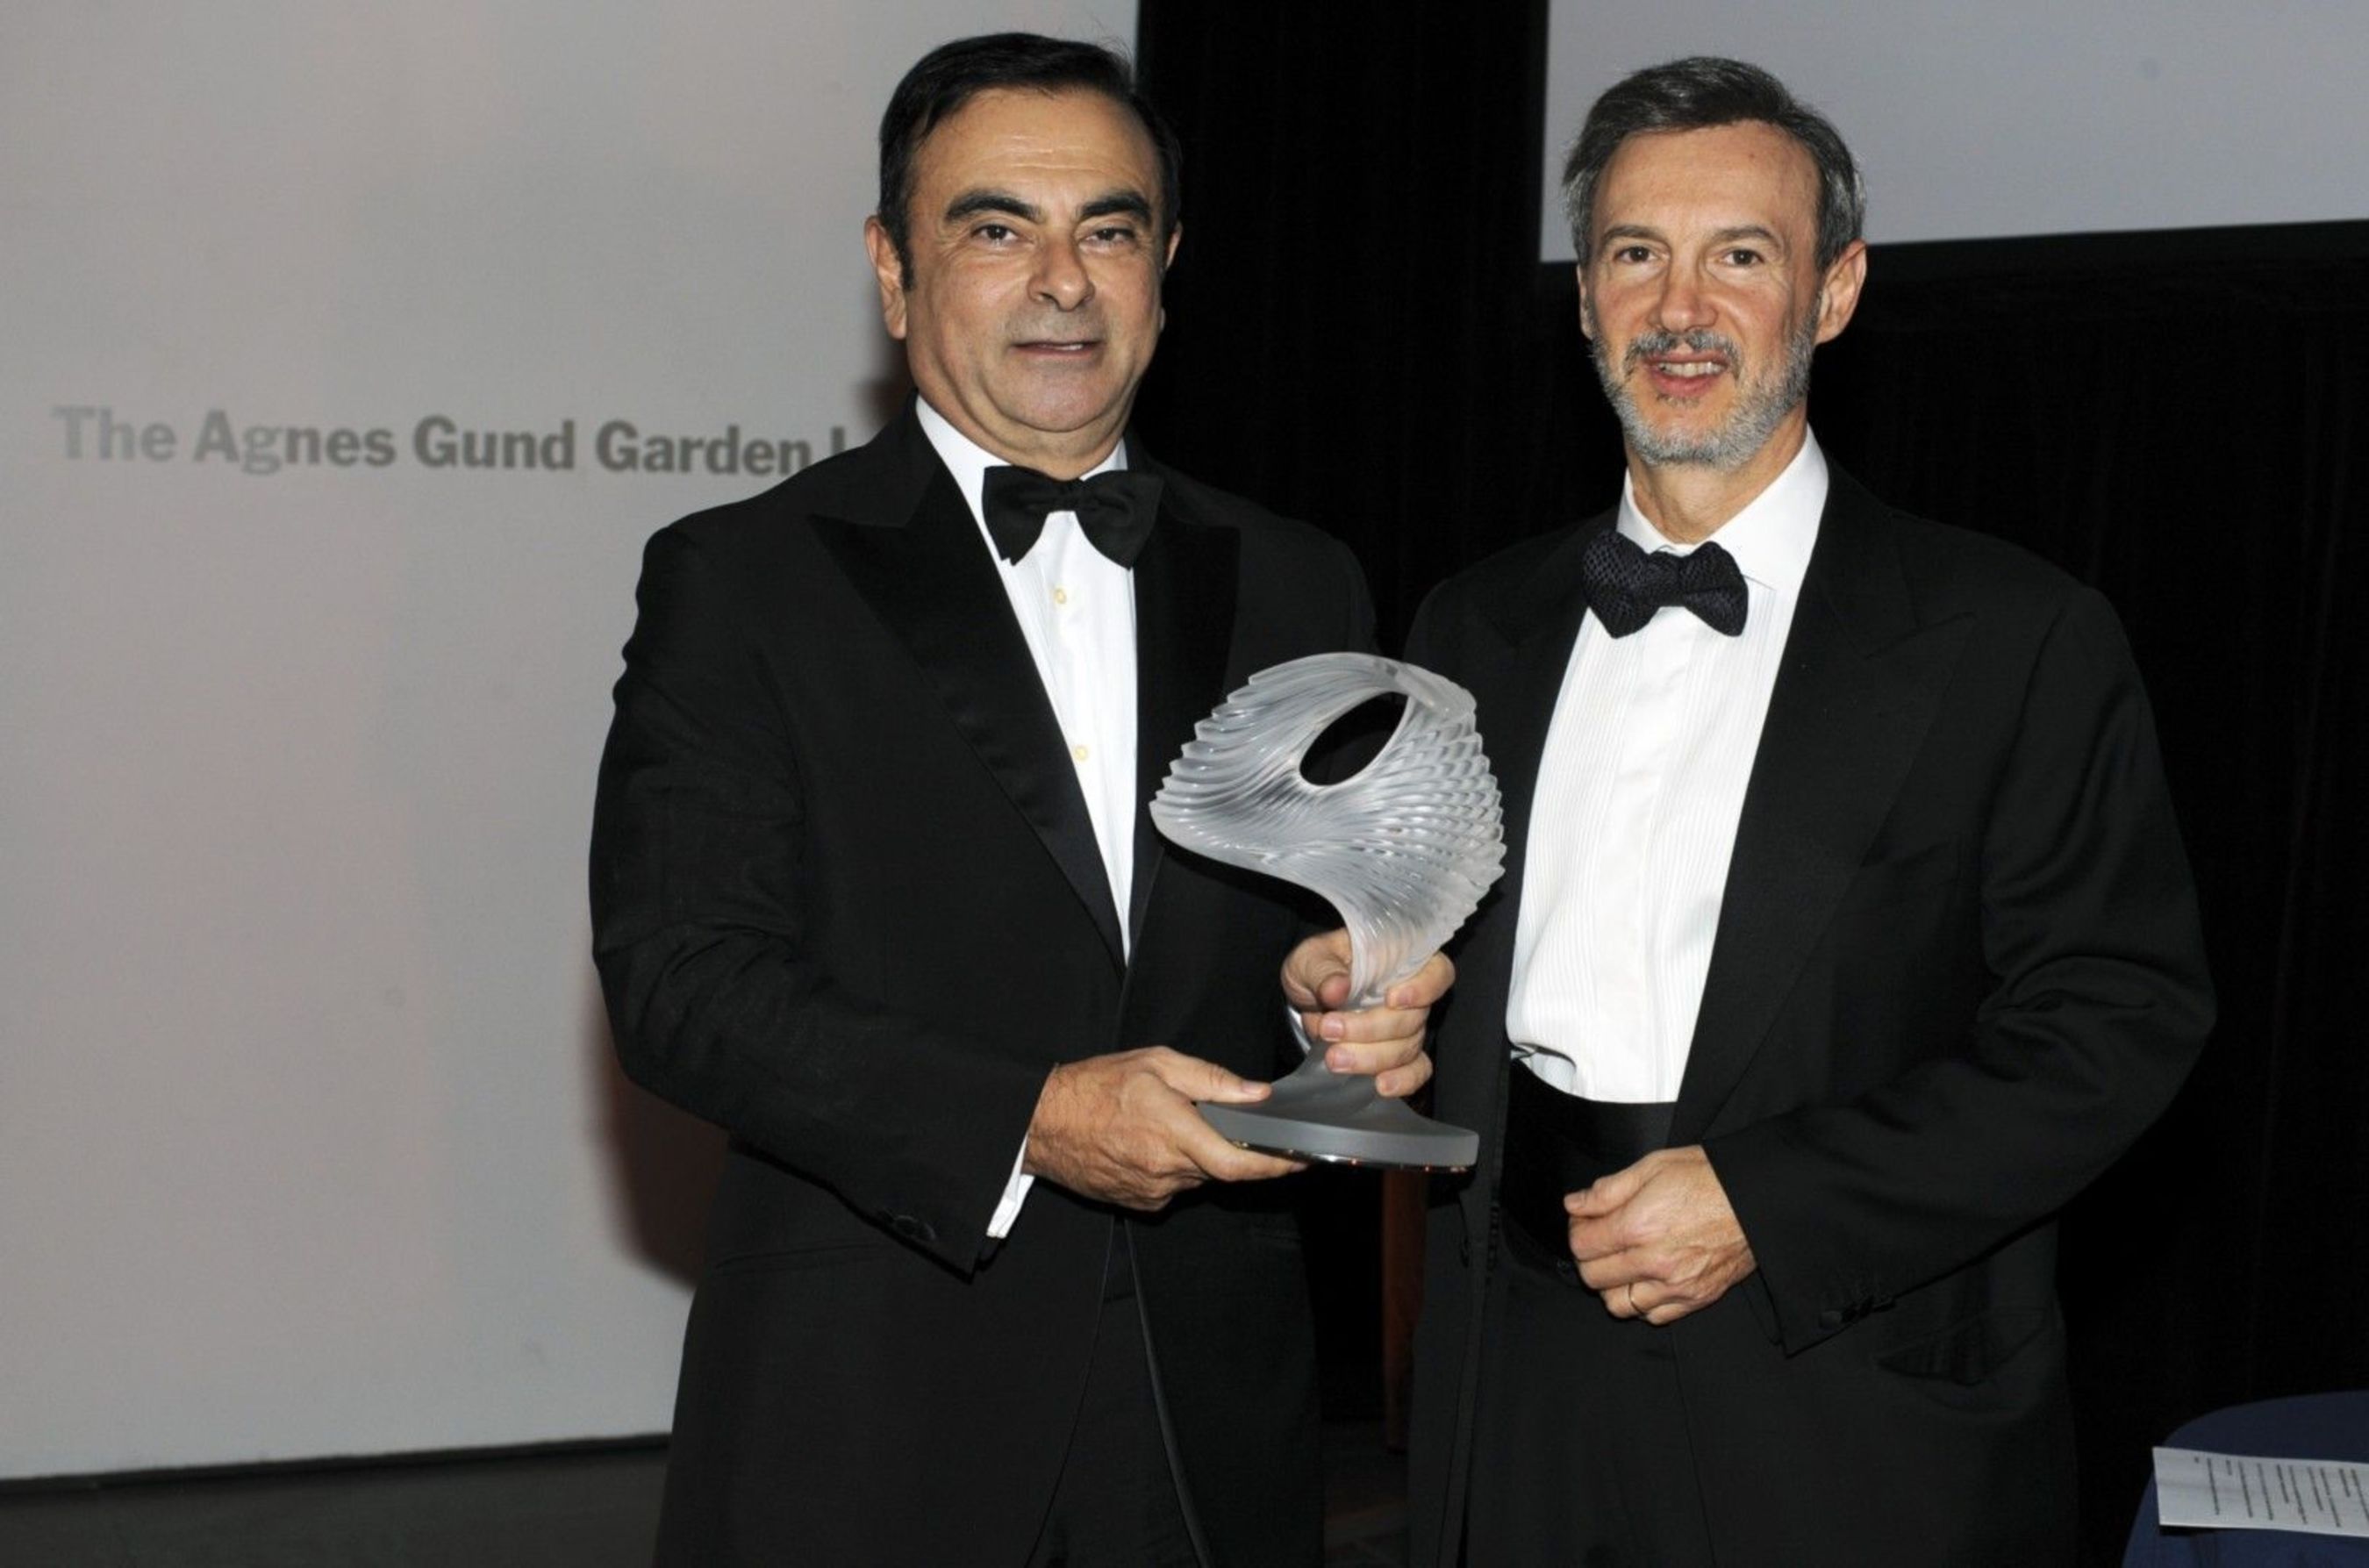 Carlos Ghosn, CEO of the Renault-Nissan Alliance, receives Action Against Hungerâeuro(TM)s Humanitarian Award at the organizationâeuro(TM)s annual gala Thursday night at the Museum of Modern Art in New York. Next to him on the right is Raymond Debbane, Chairman of the Board of Directors of Action Against Hunger. The group honored Nissan, Renault and the Alliance for their global humanitarian work, including the establishment of an emergency rapid-response fund to assist with humanitarian disasters. Photo by Stephane Kossmann (PRNewsFoto/Renault-Nissan Alliance)